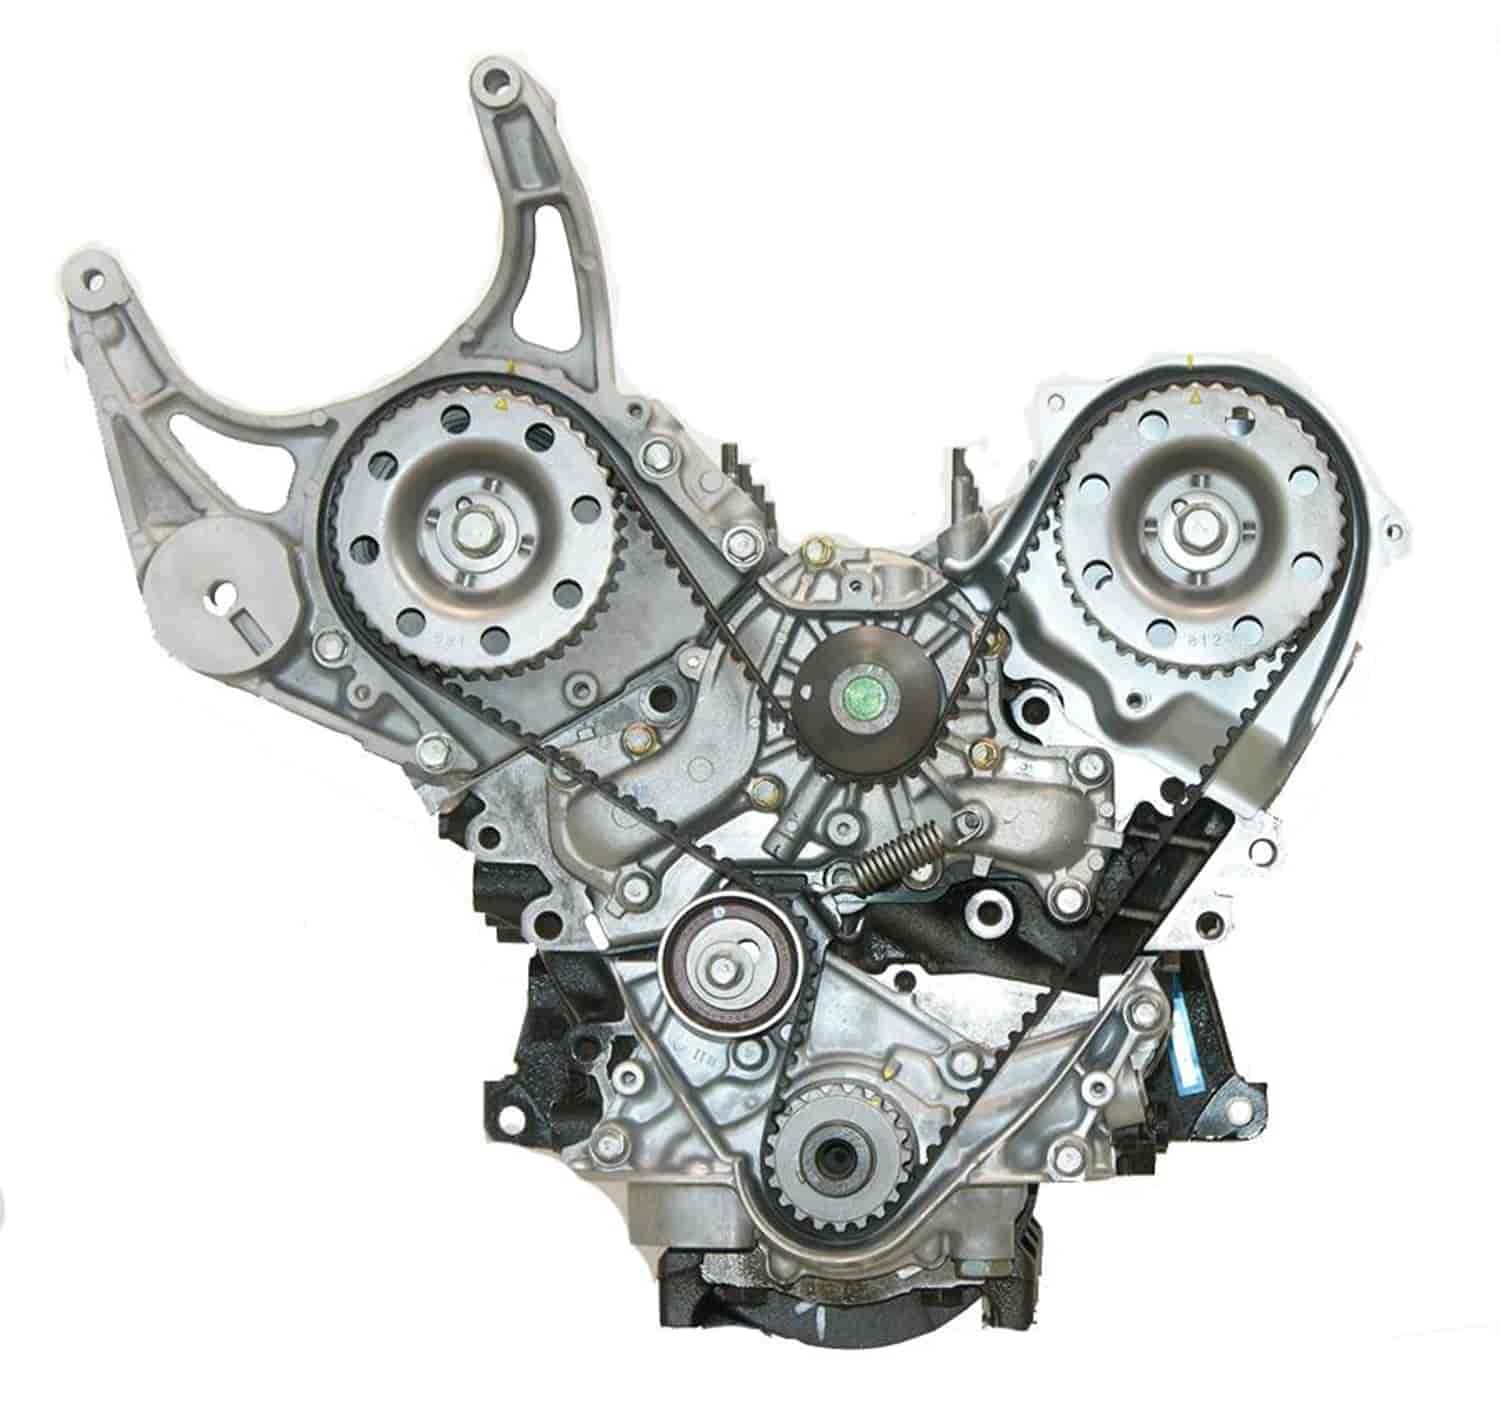 Remanufactured Crate Engine for 1990-2000 Chrysler, Dodge, Plymouth with 3.0L V6